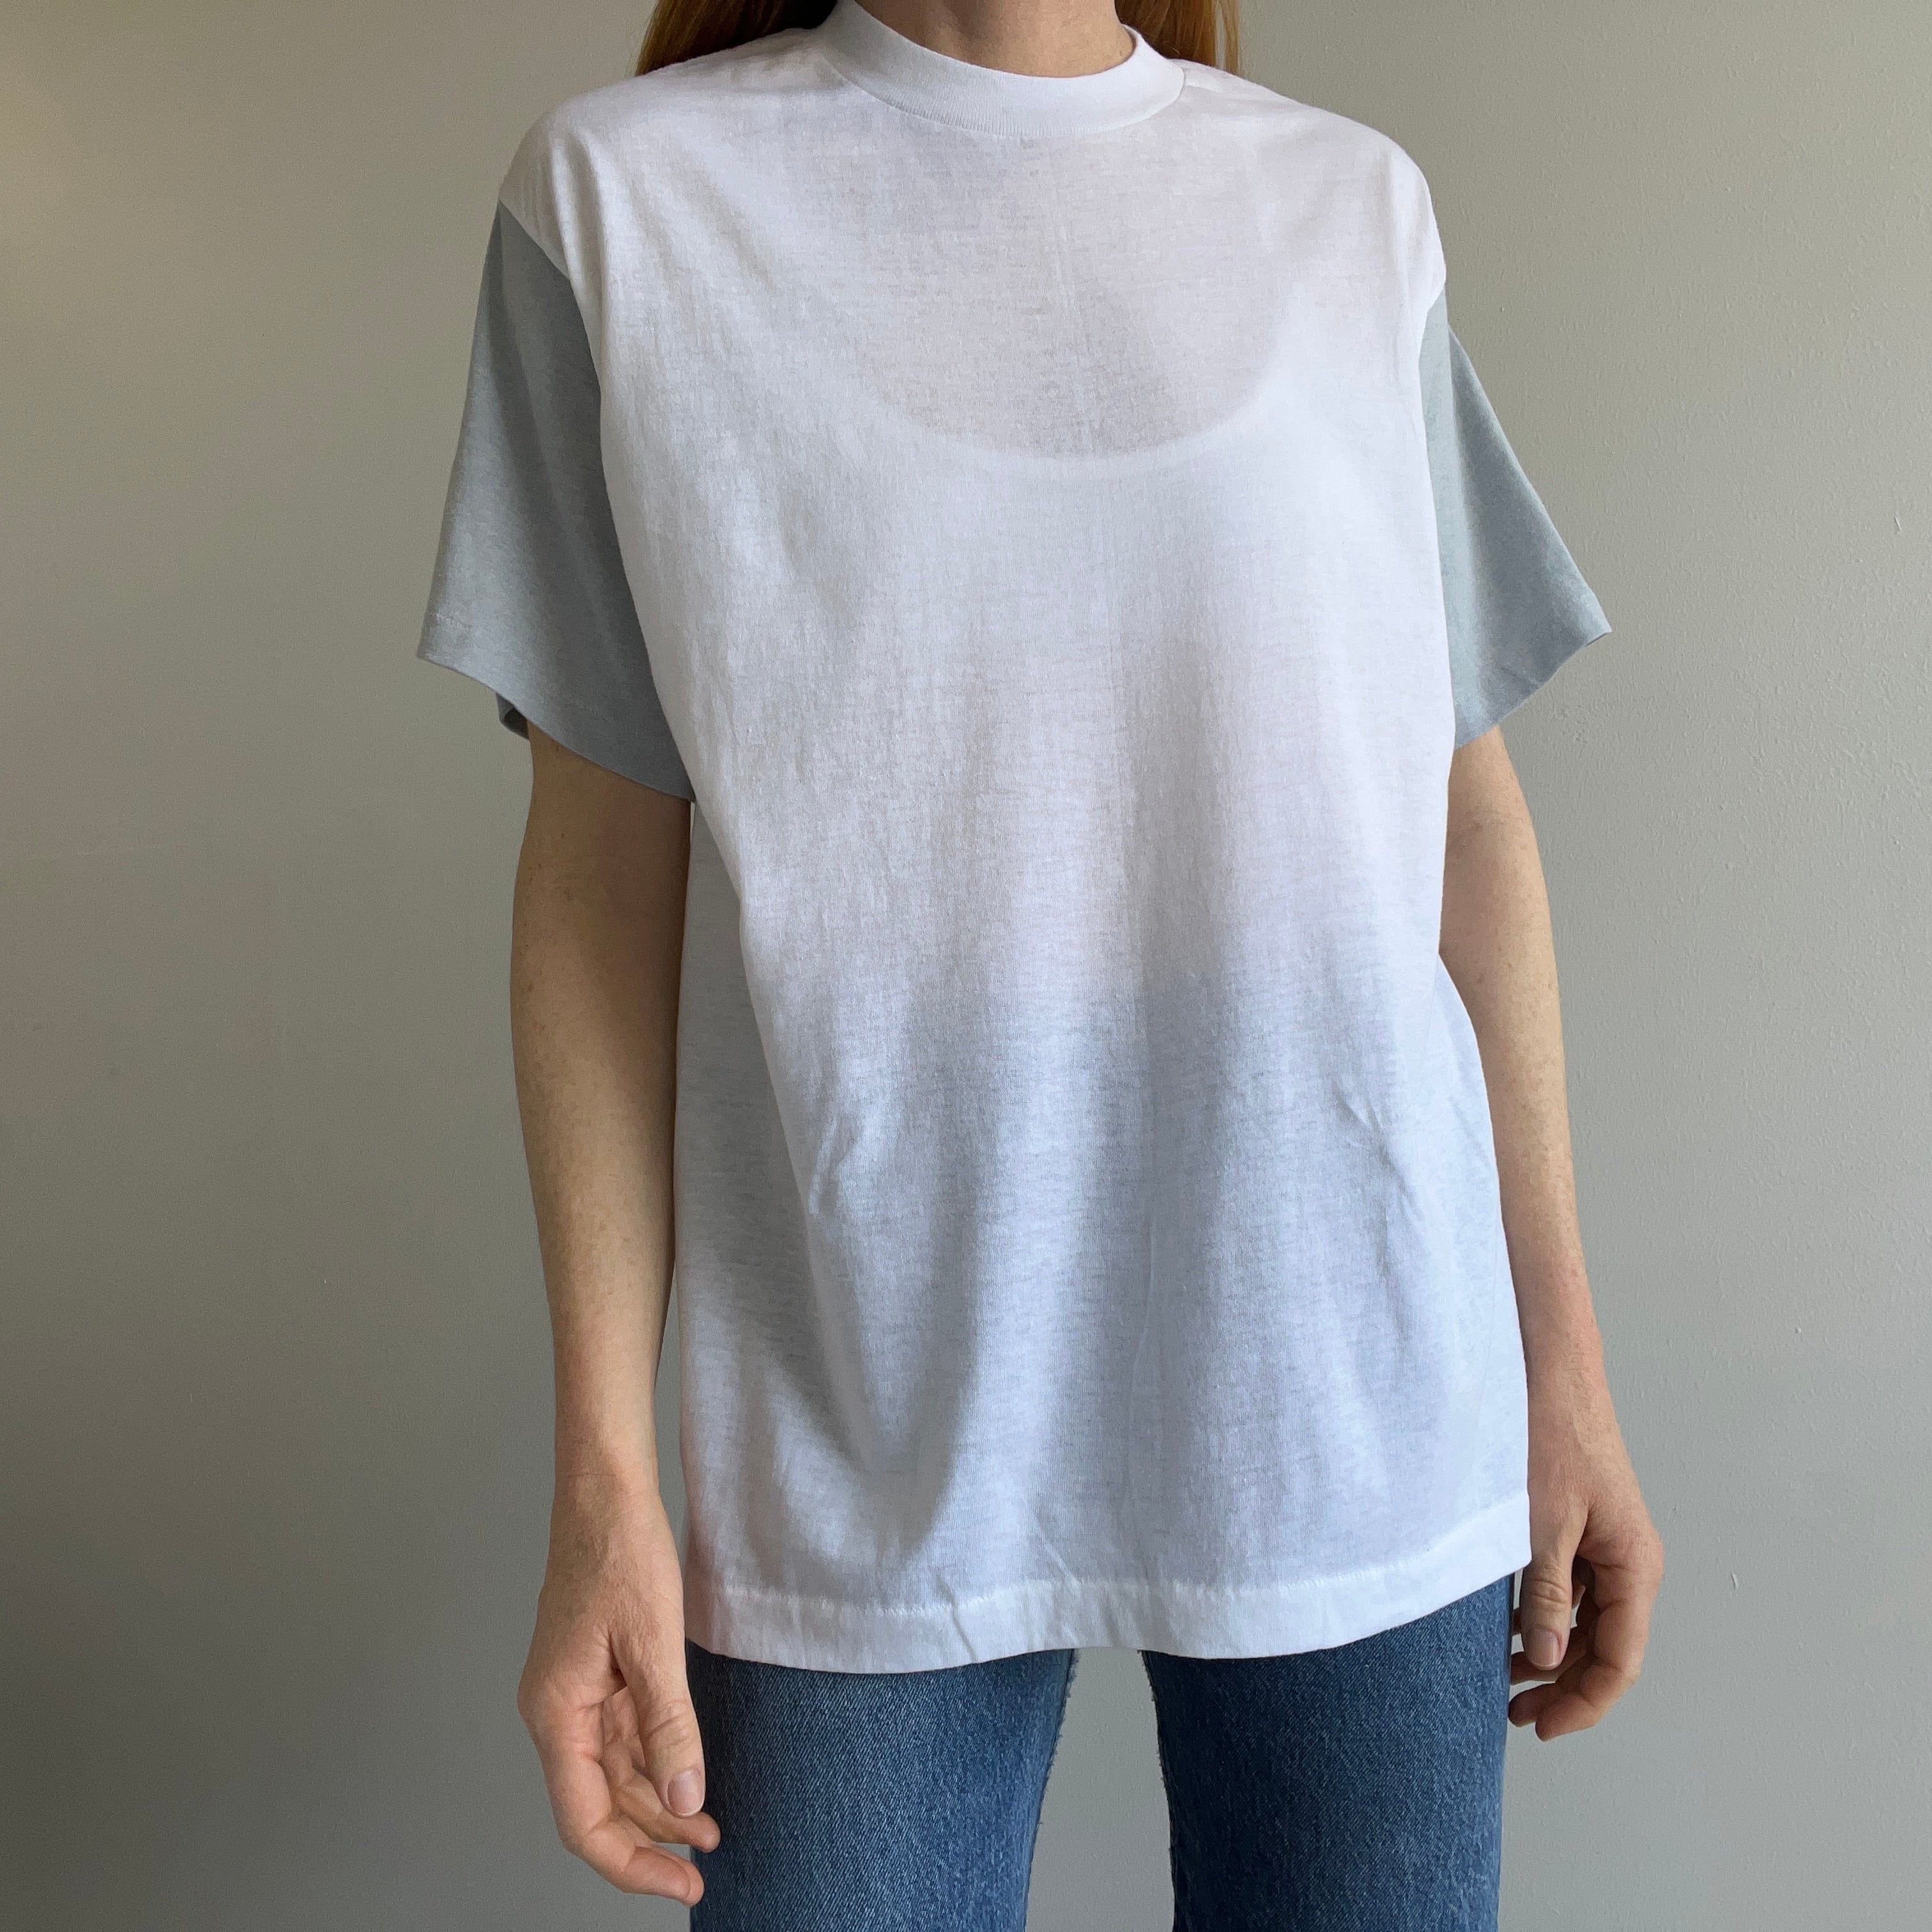 1980s Never Worn White and Gray Color Block T-Shirt